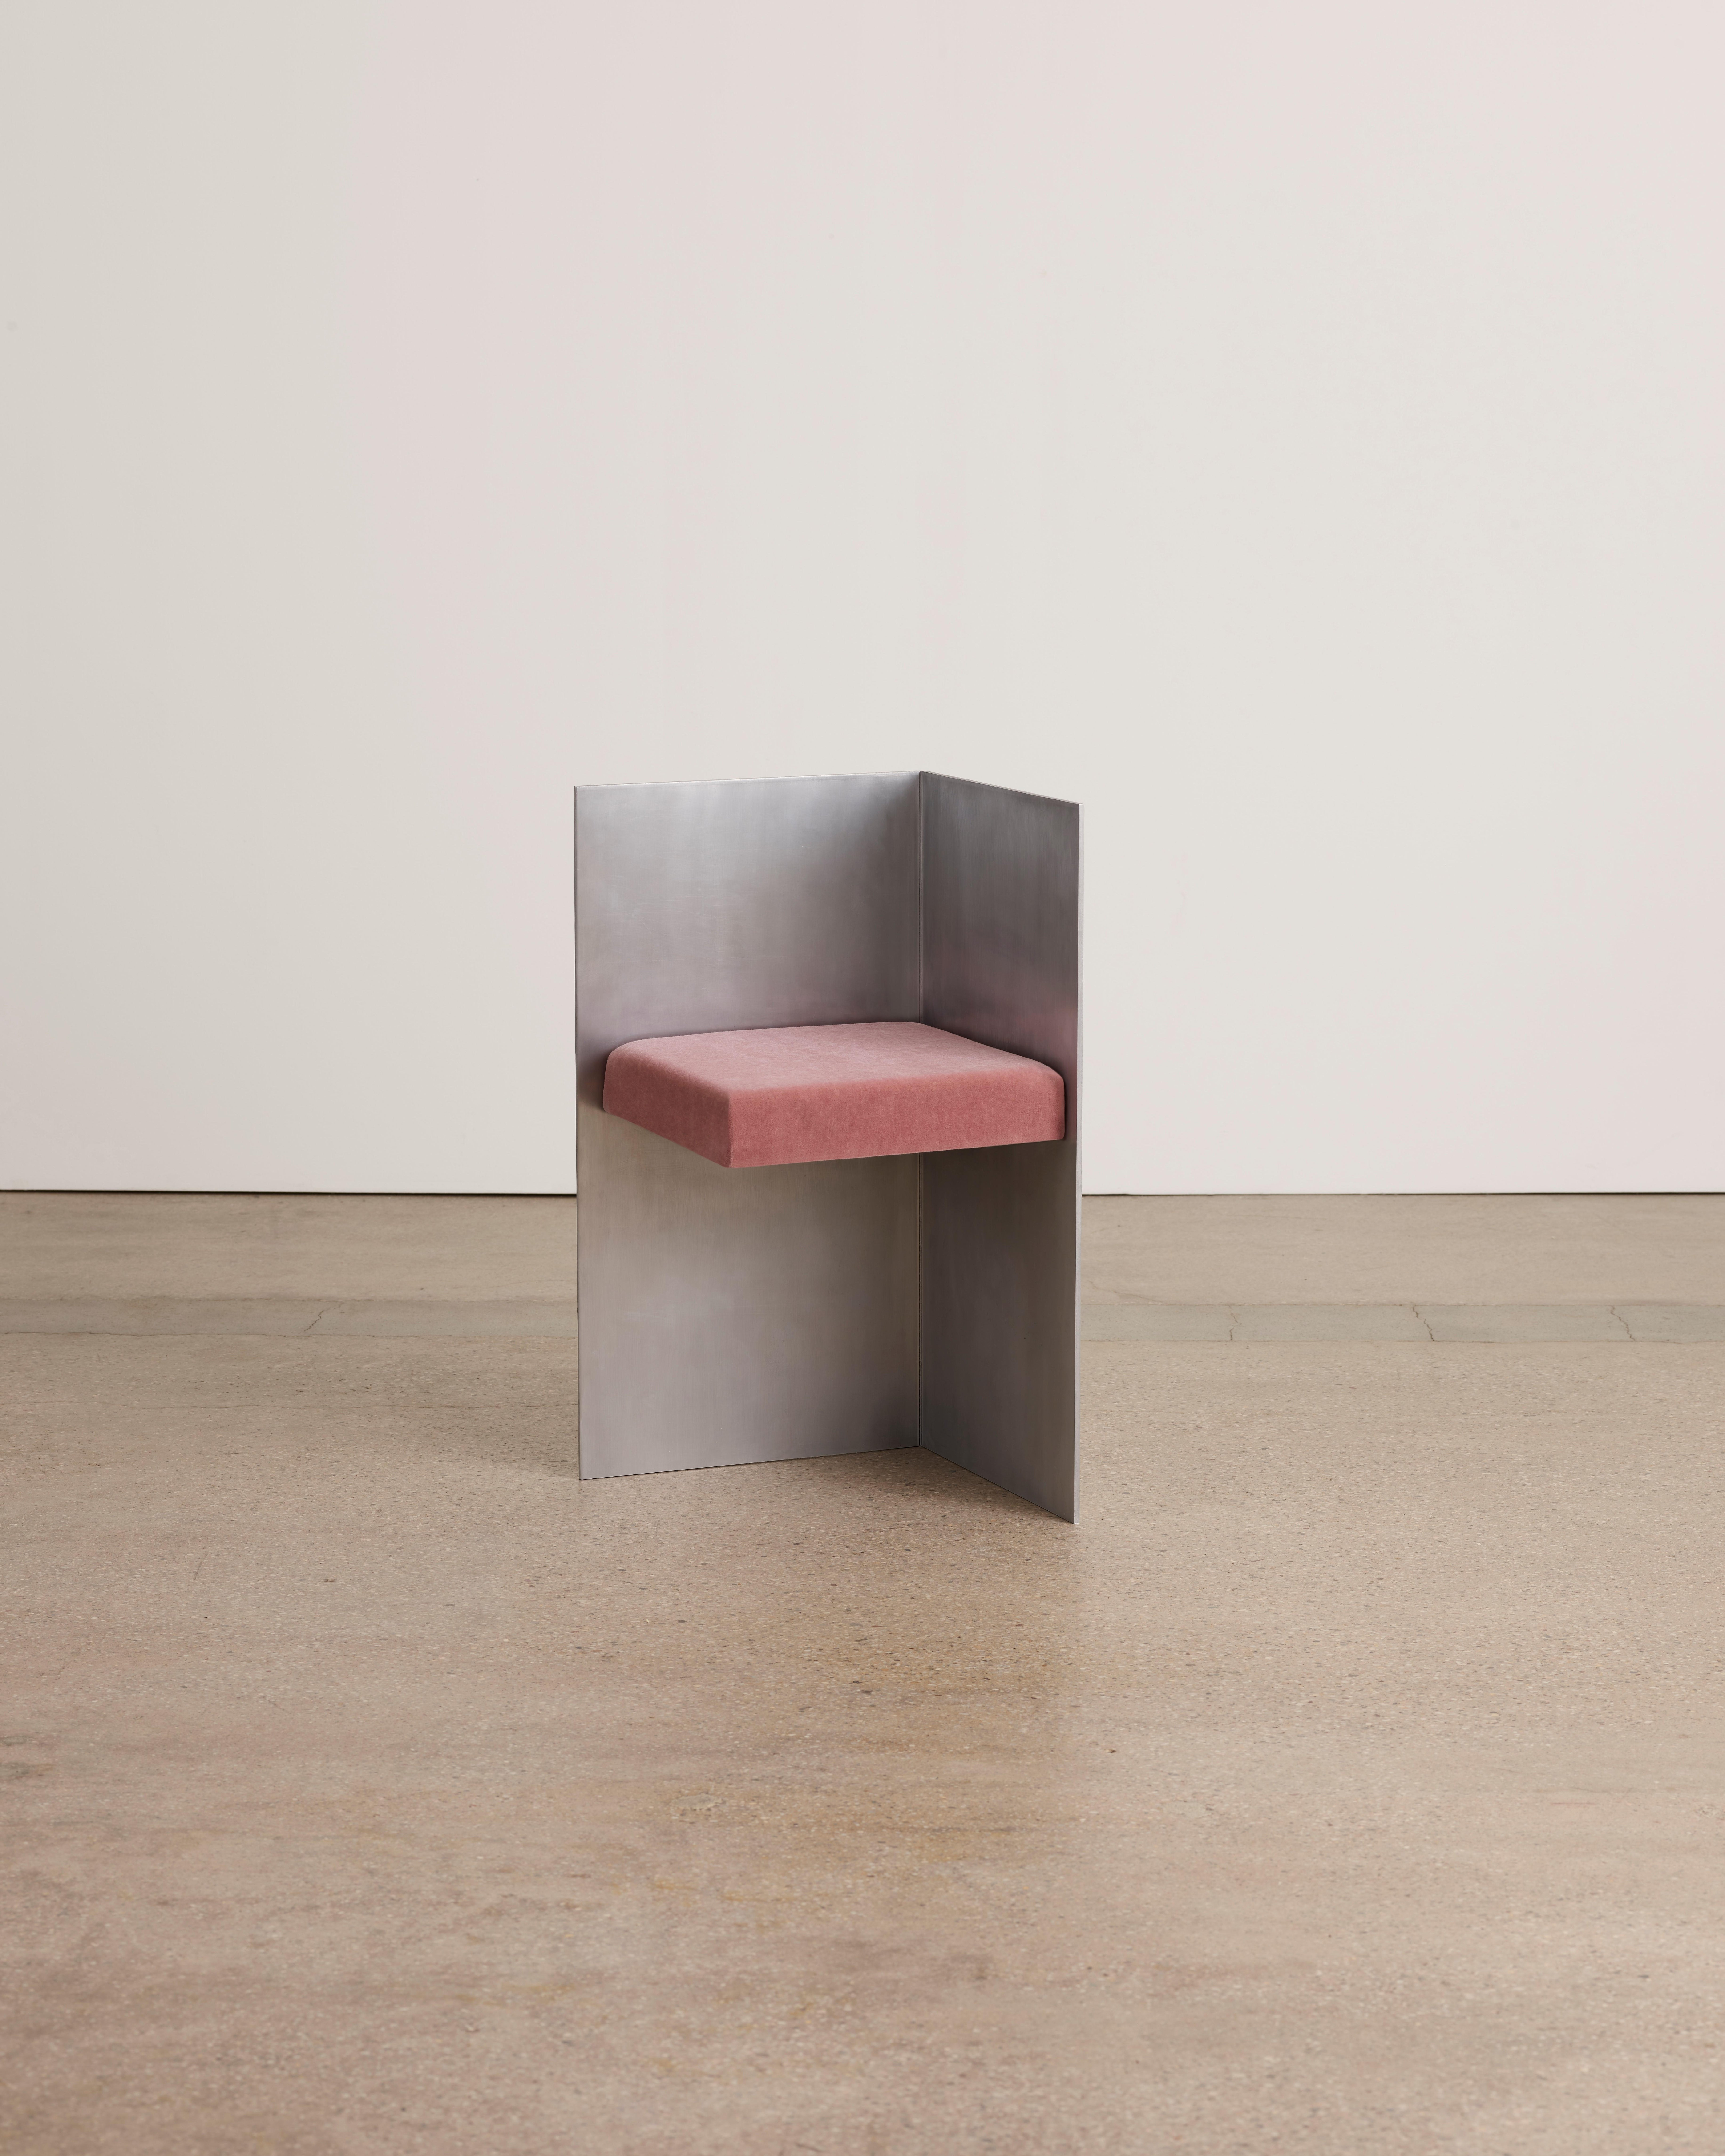 Chair C by Umberto Bellardi Ricci.
Dimensions: W 39.4 x D 39.4 x H 72.4 cm.
Materials: aluminium, brass angles, mohair upholstery. 

Umberto Bellardi Ricci is an Italian sculptor and architect based in New York City, practicing across London,